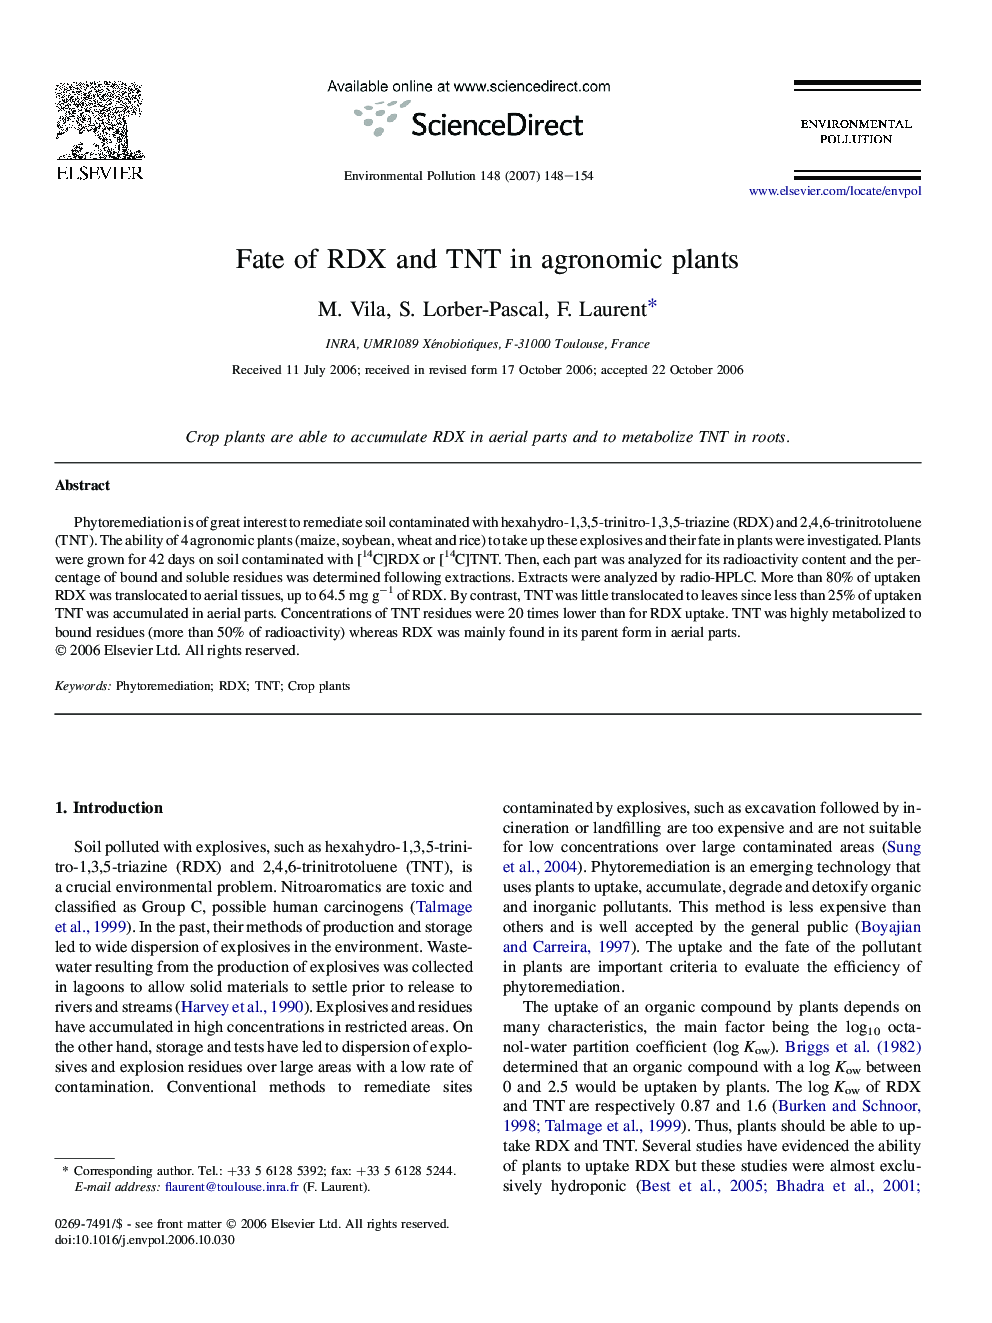 Fate of RDX and TNT in agronomic plants